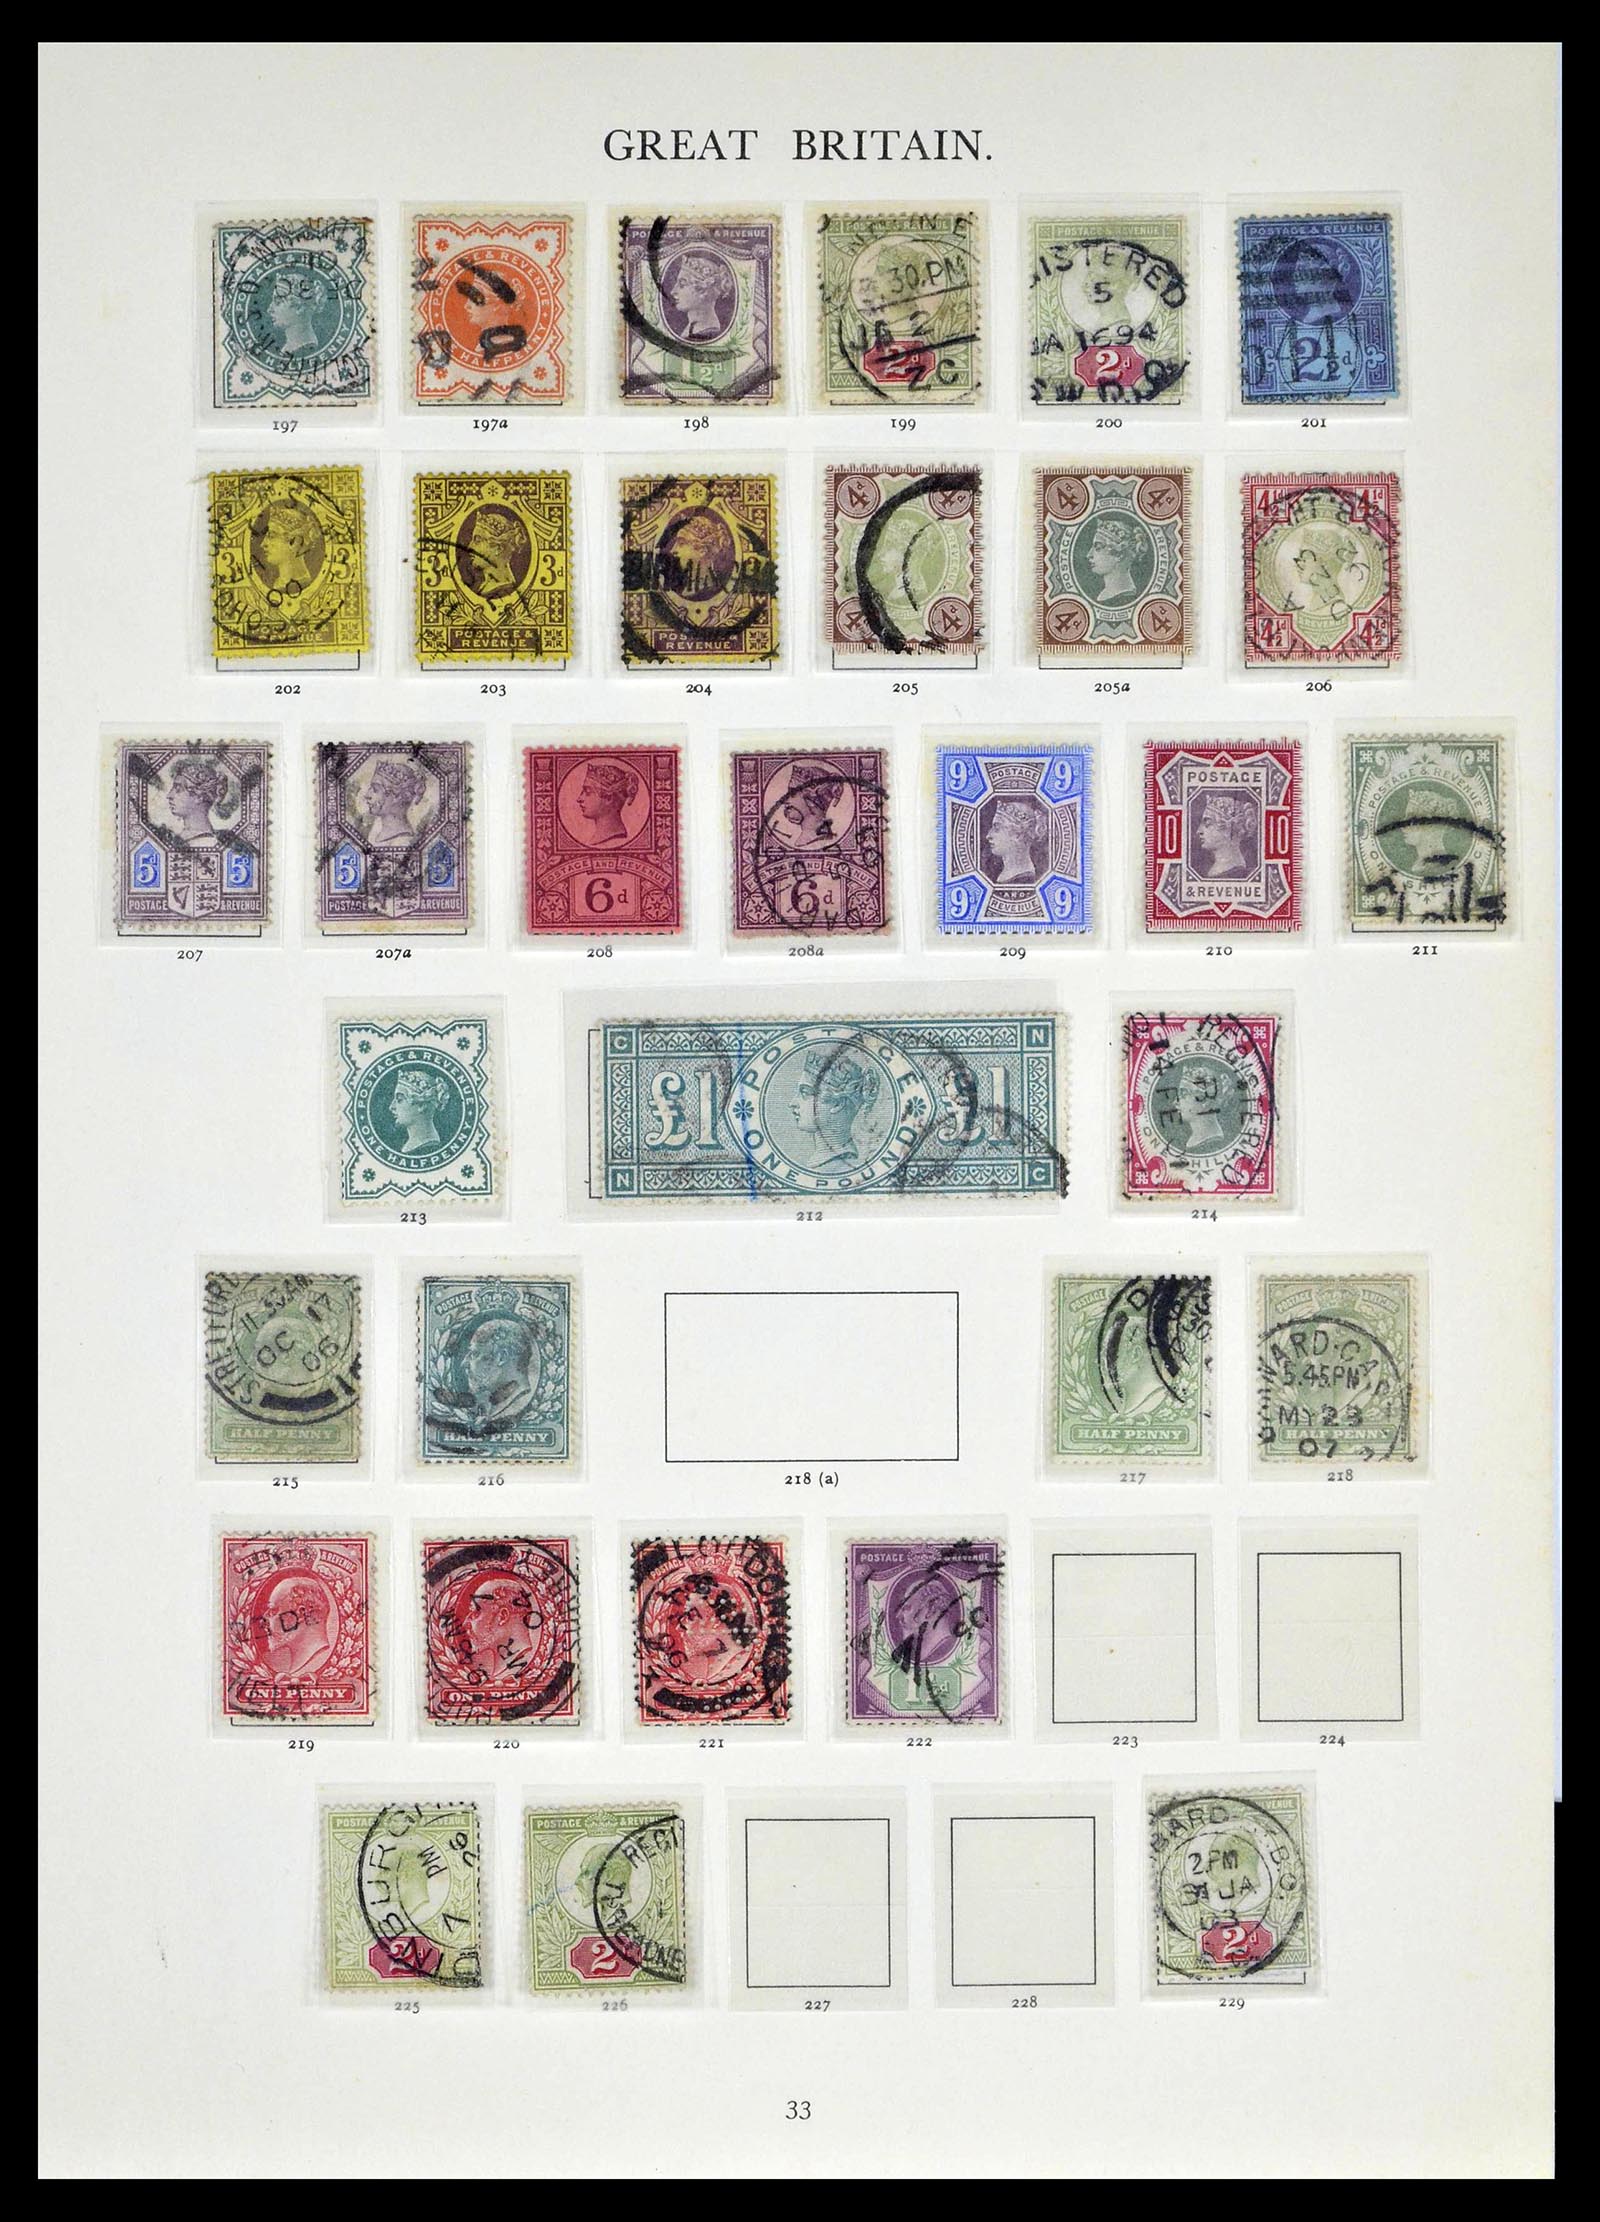 39025 0013 - Stamp collection 39025 Great Britain specialised 1840-1990.